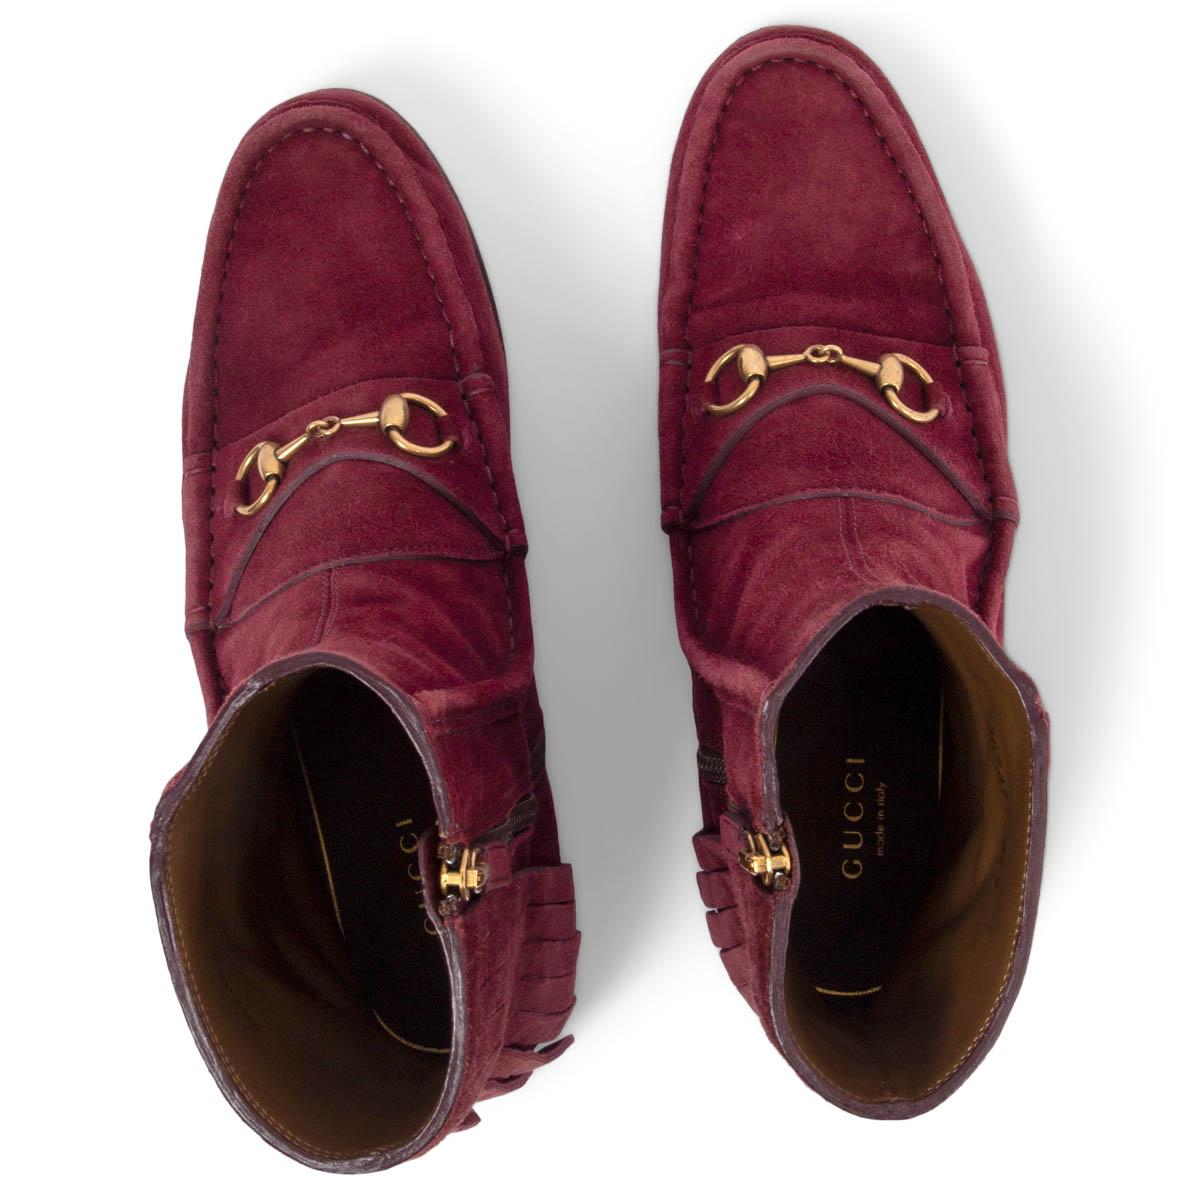 Women's GUCCI burgundy suede 2014 FRINGED HORSEBIT LOAFER Boots Shoes 37.5 For Sale